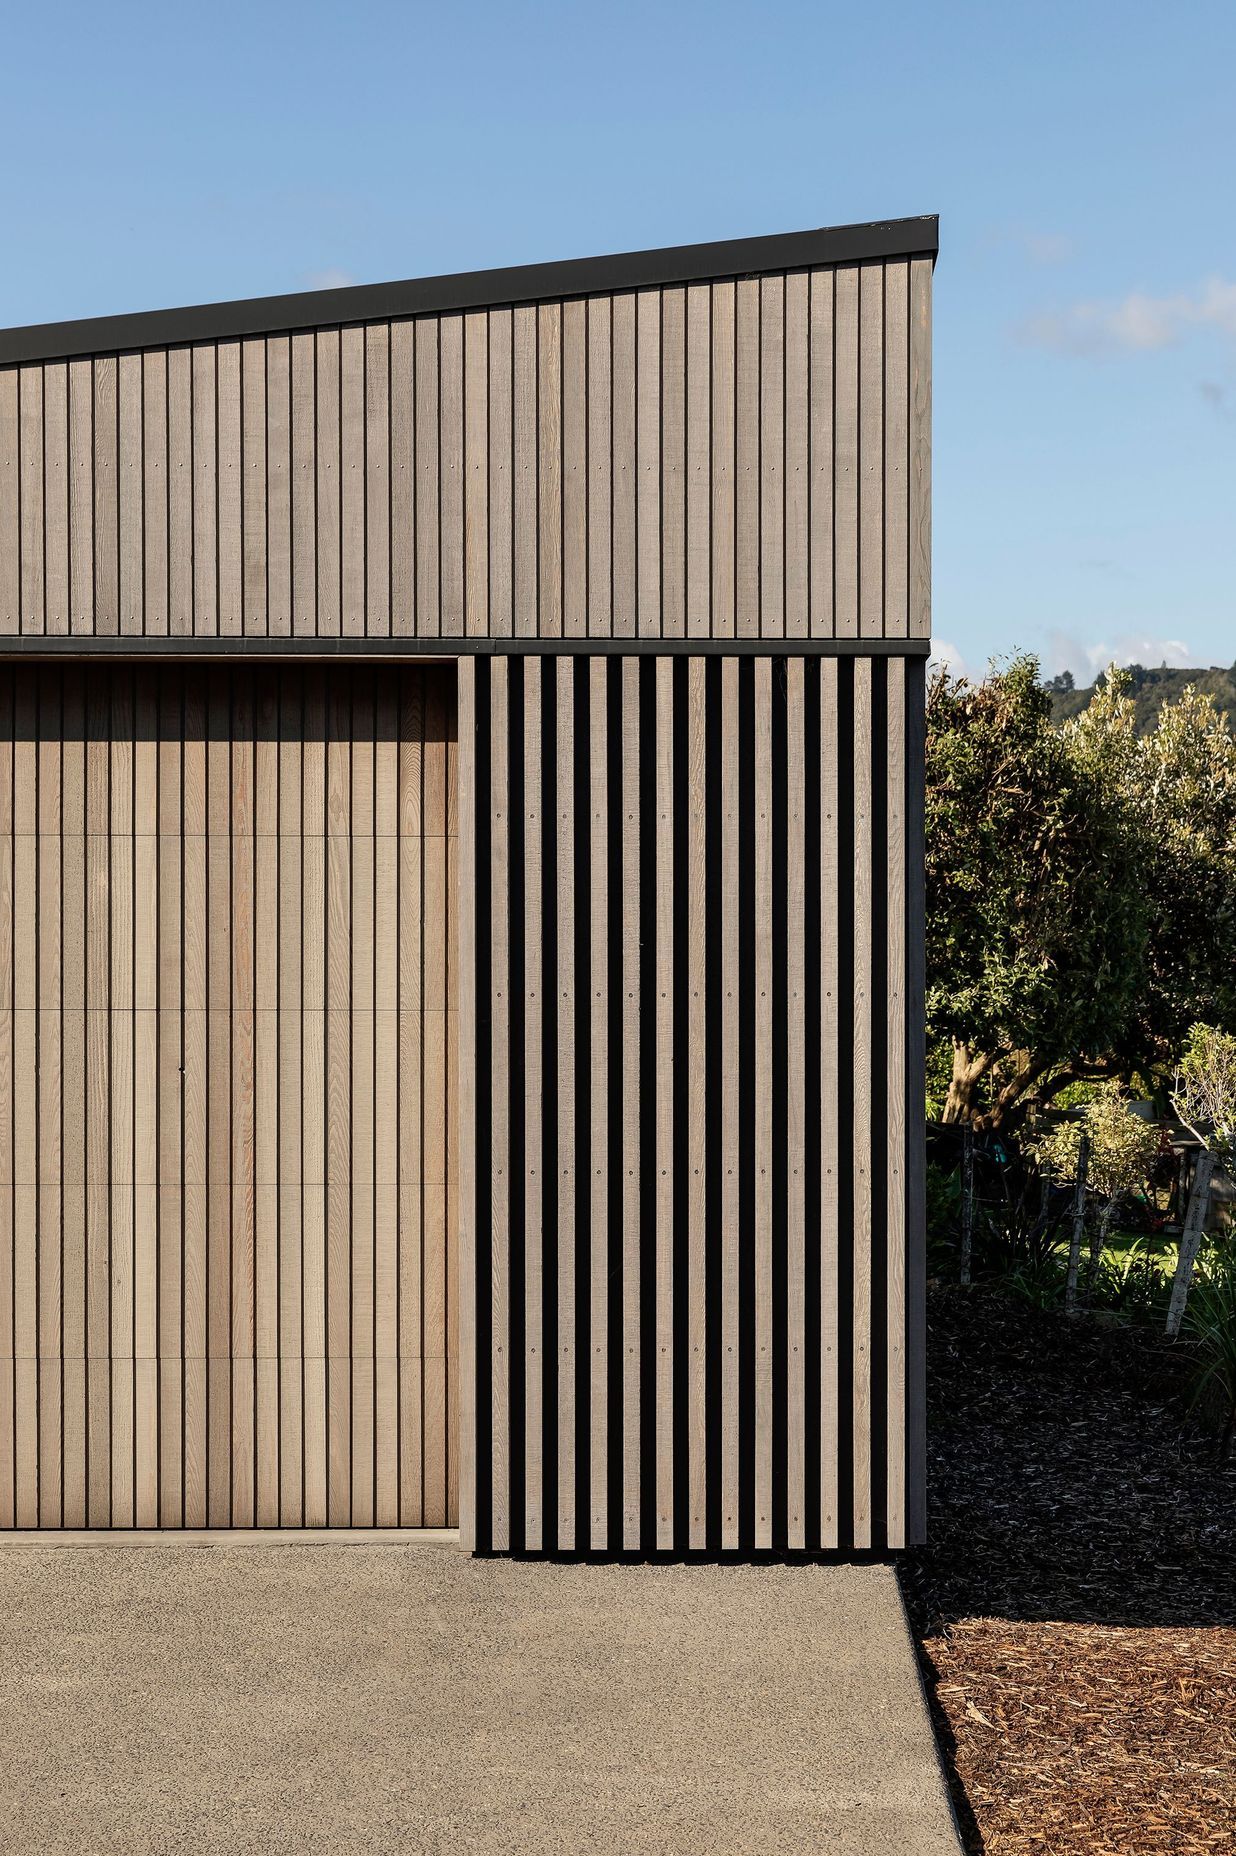 The garage was conceived a separate form and sits below the house on the site.